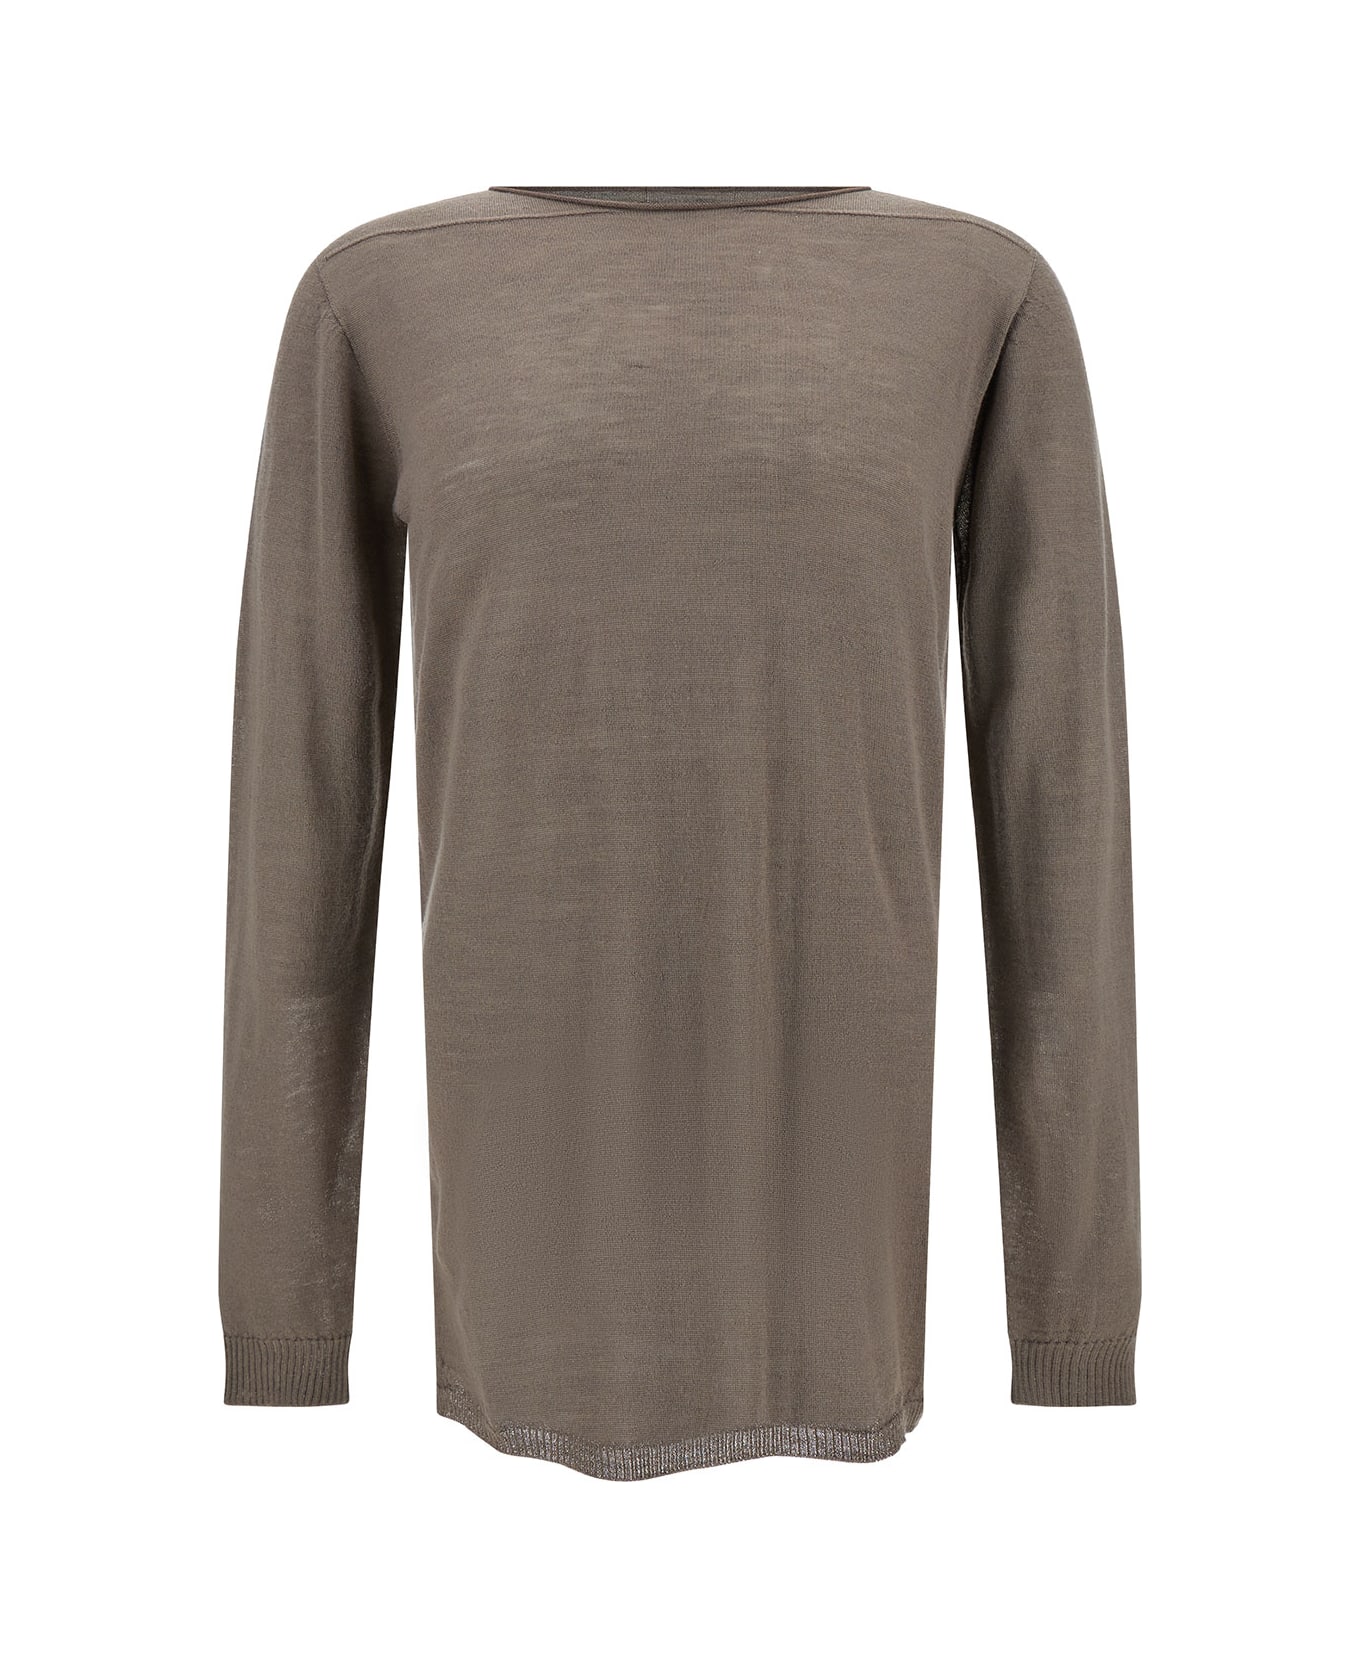 Rick Owens Beige Long-sleeve Top With Boat Neckline In Wool Man - Pink ニットウェア